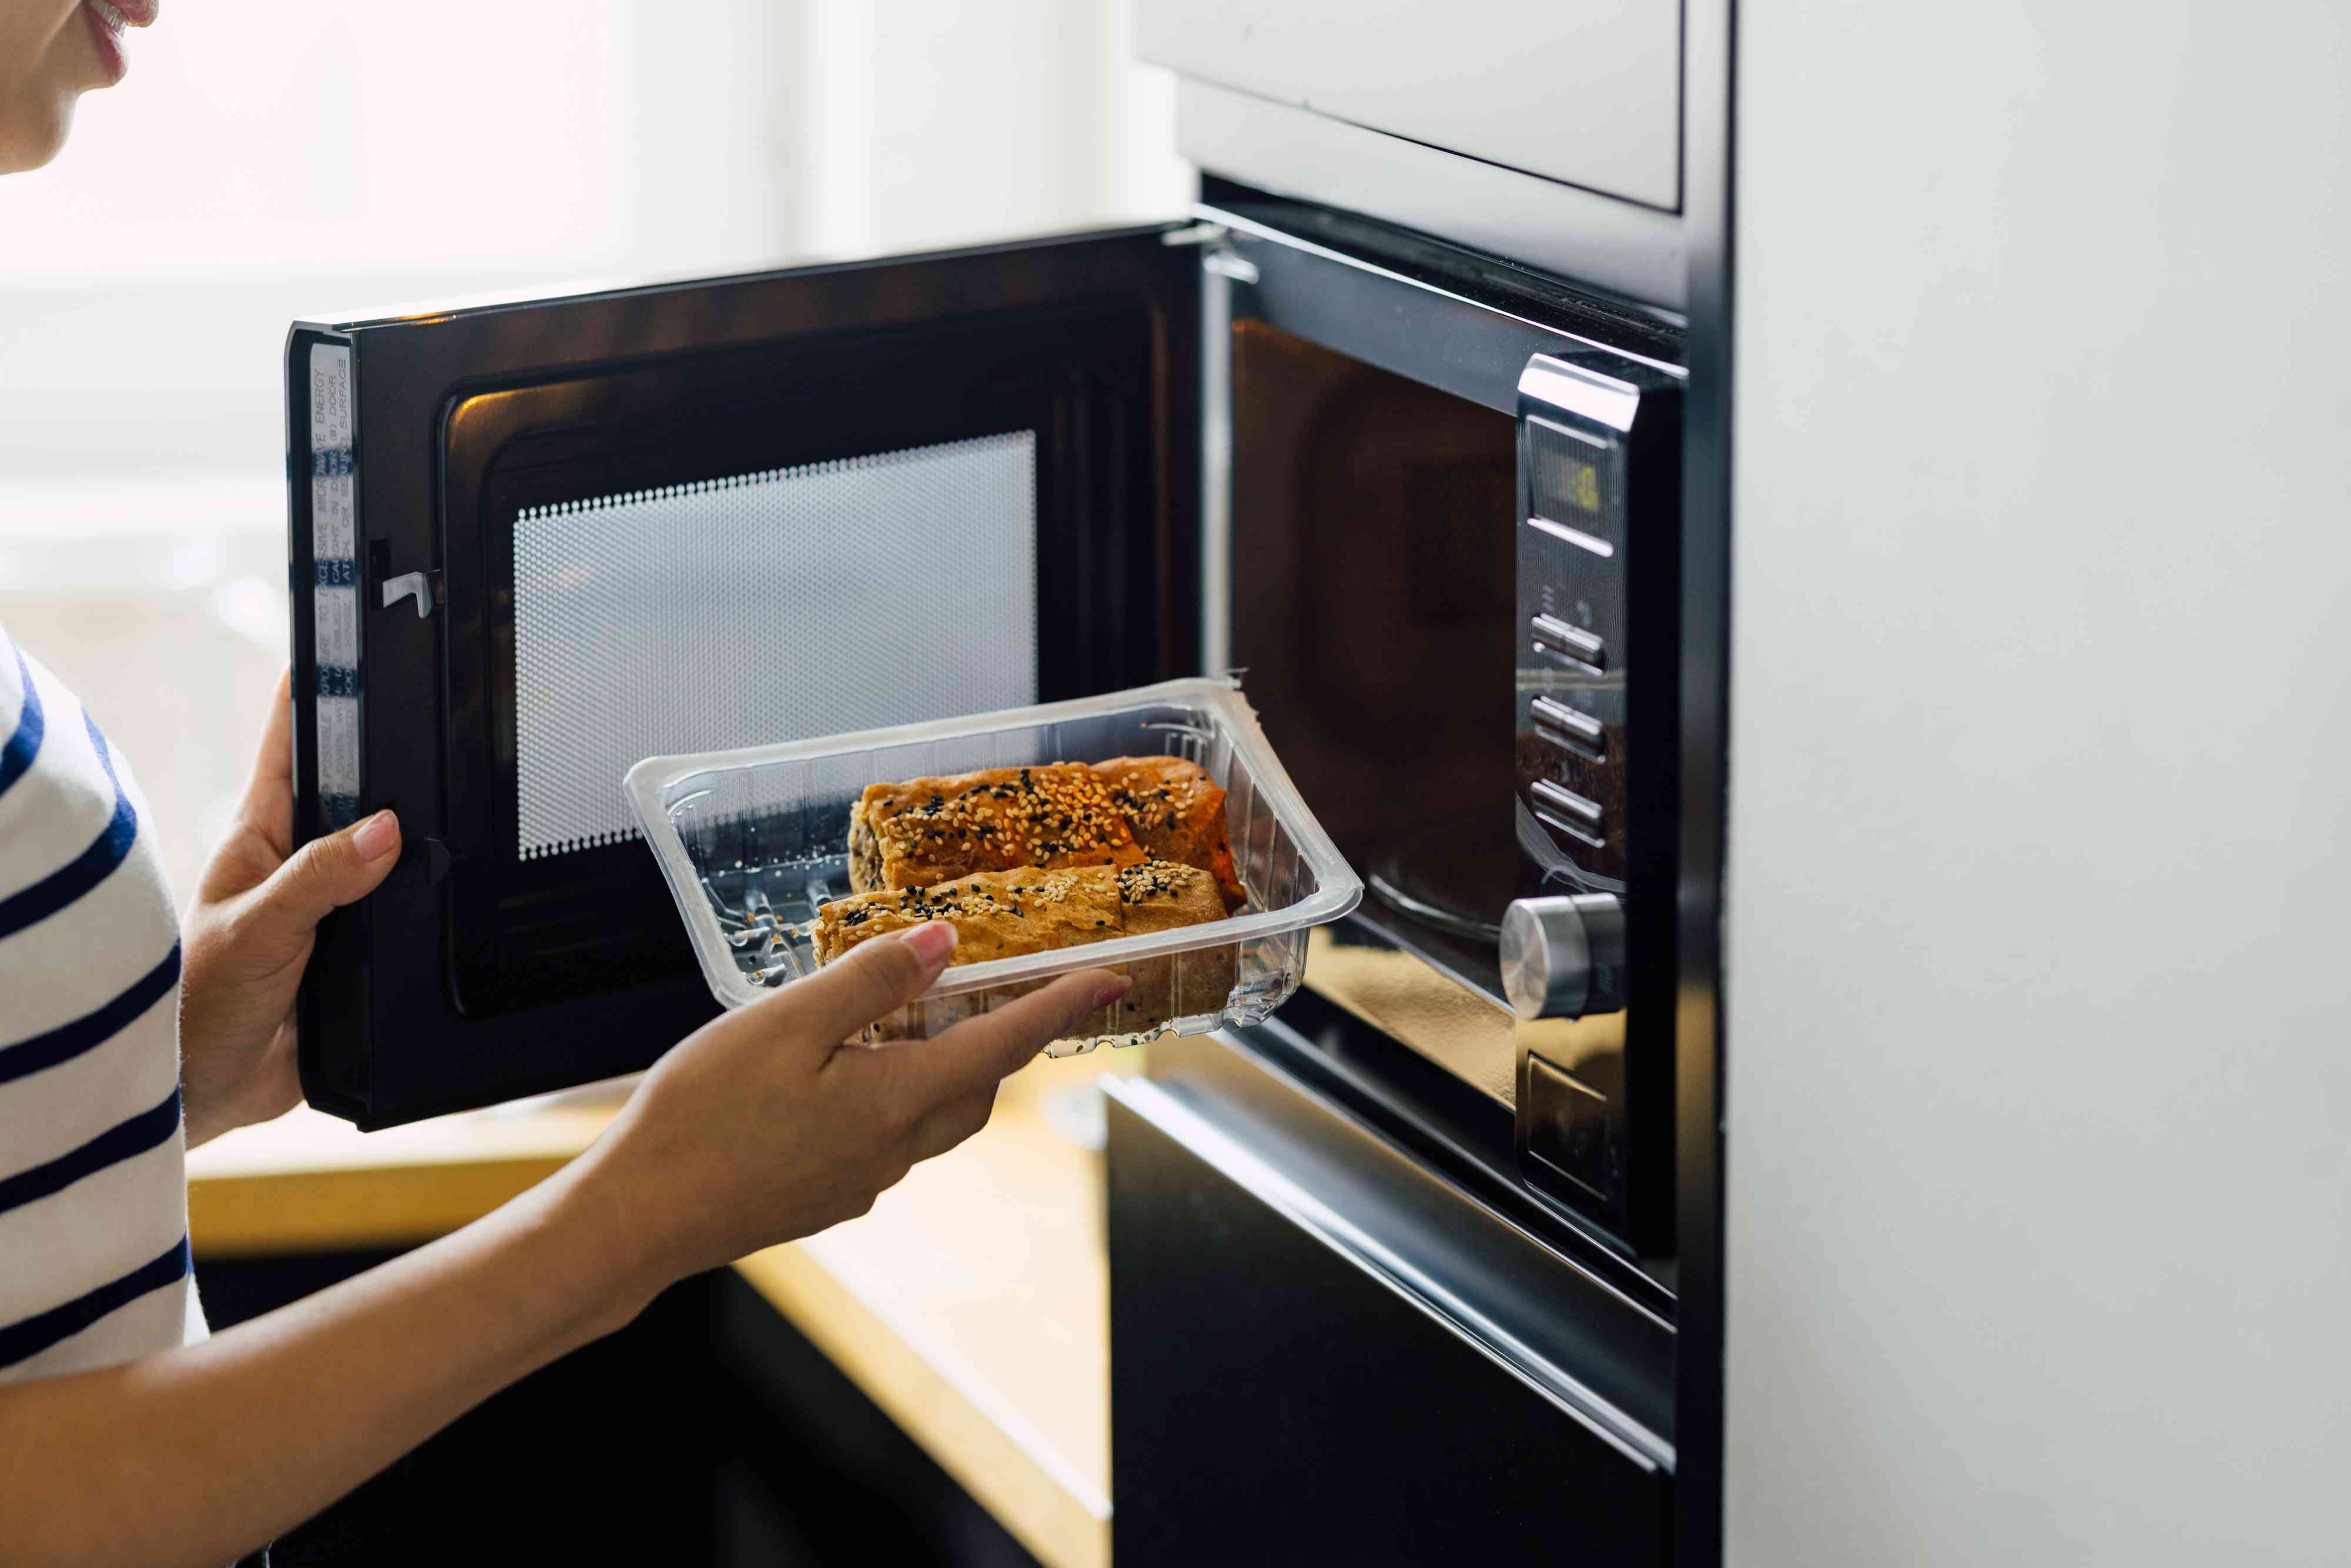 Nestlé Frozen Meals for GLP-1 Users Are Good for Portion Control. But Are They Nutritious?